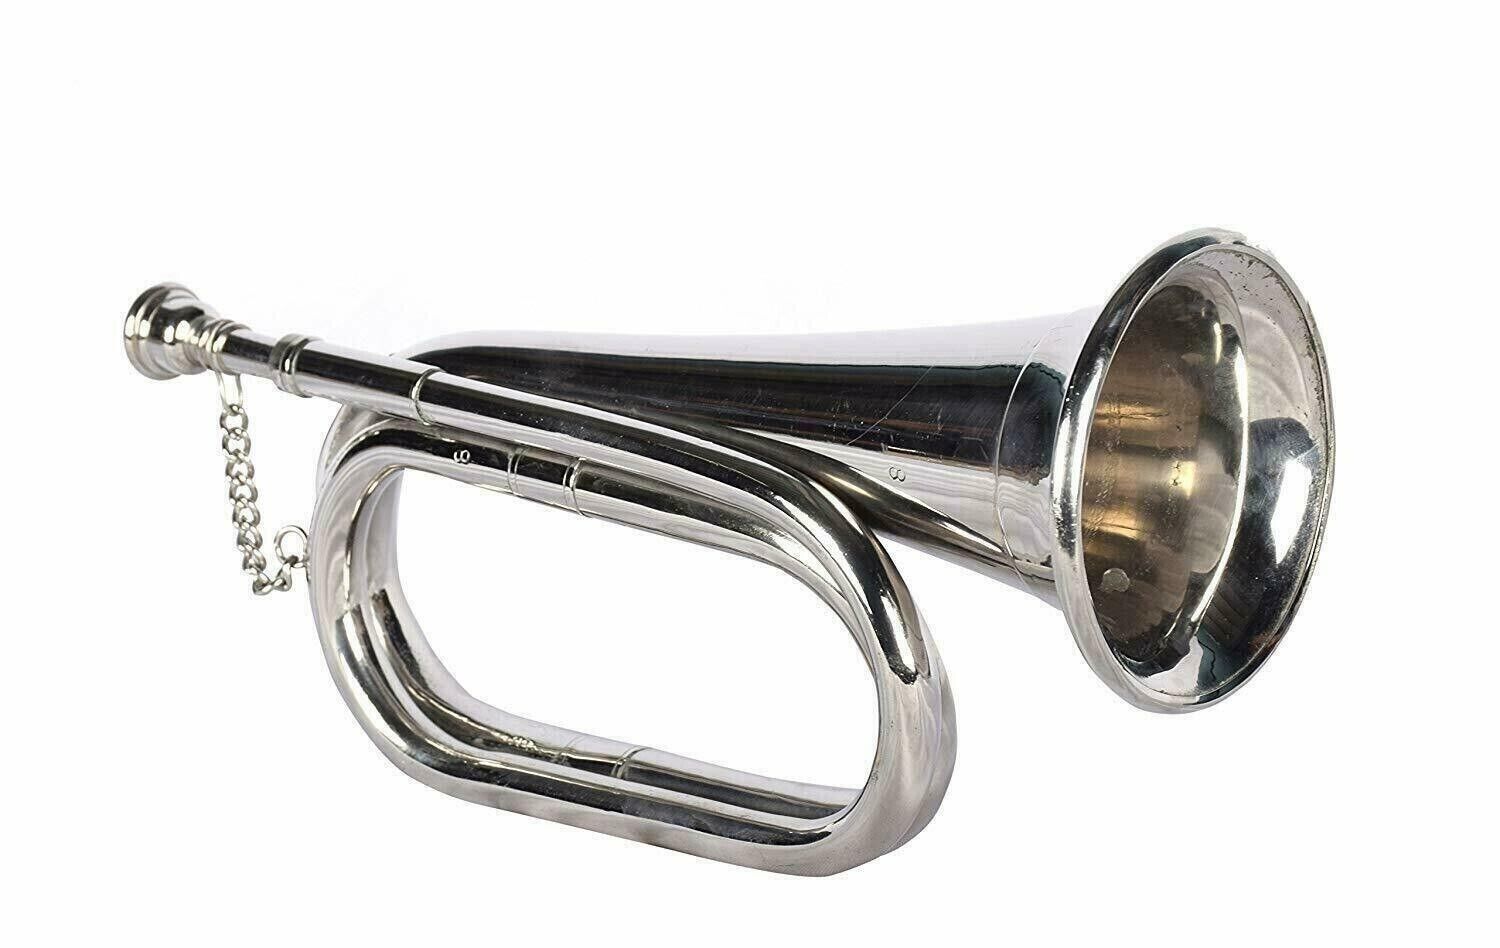 Military Parade Cavalry Horn Old School Solid Nickle Bugle Orchestra Band Bigul